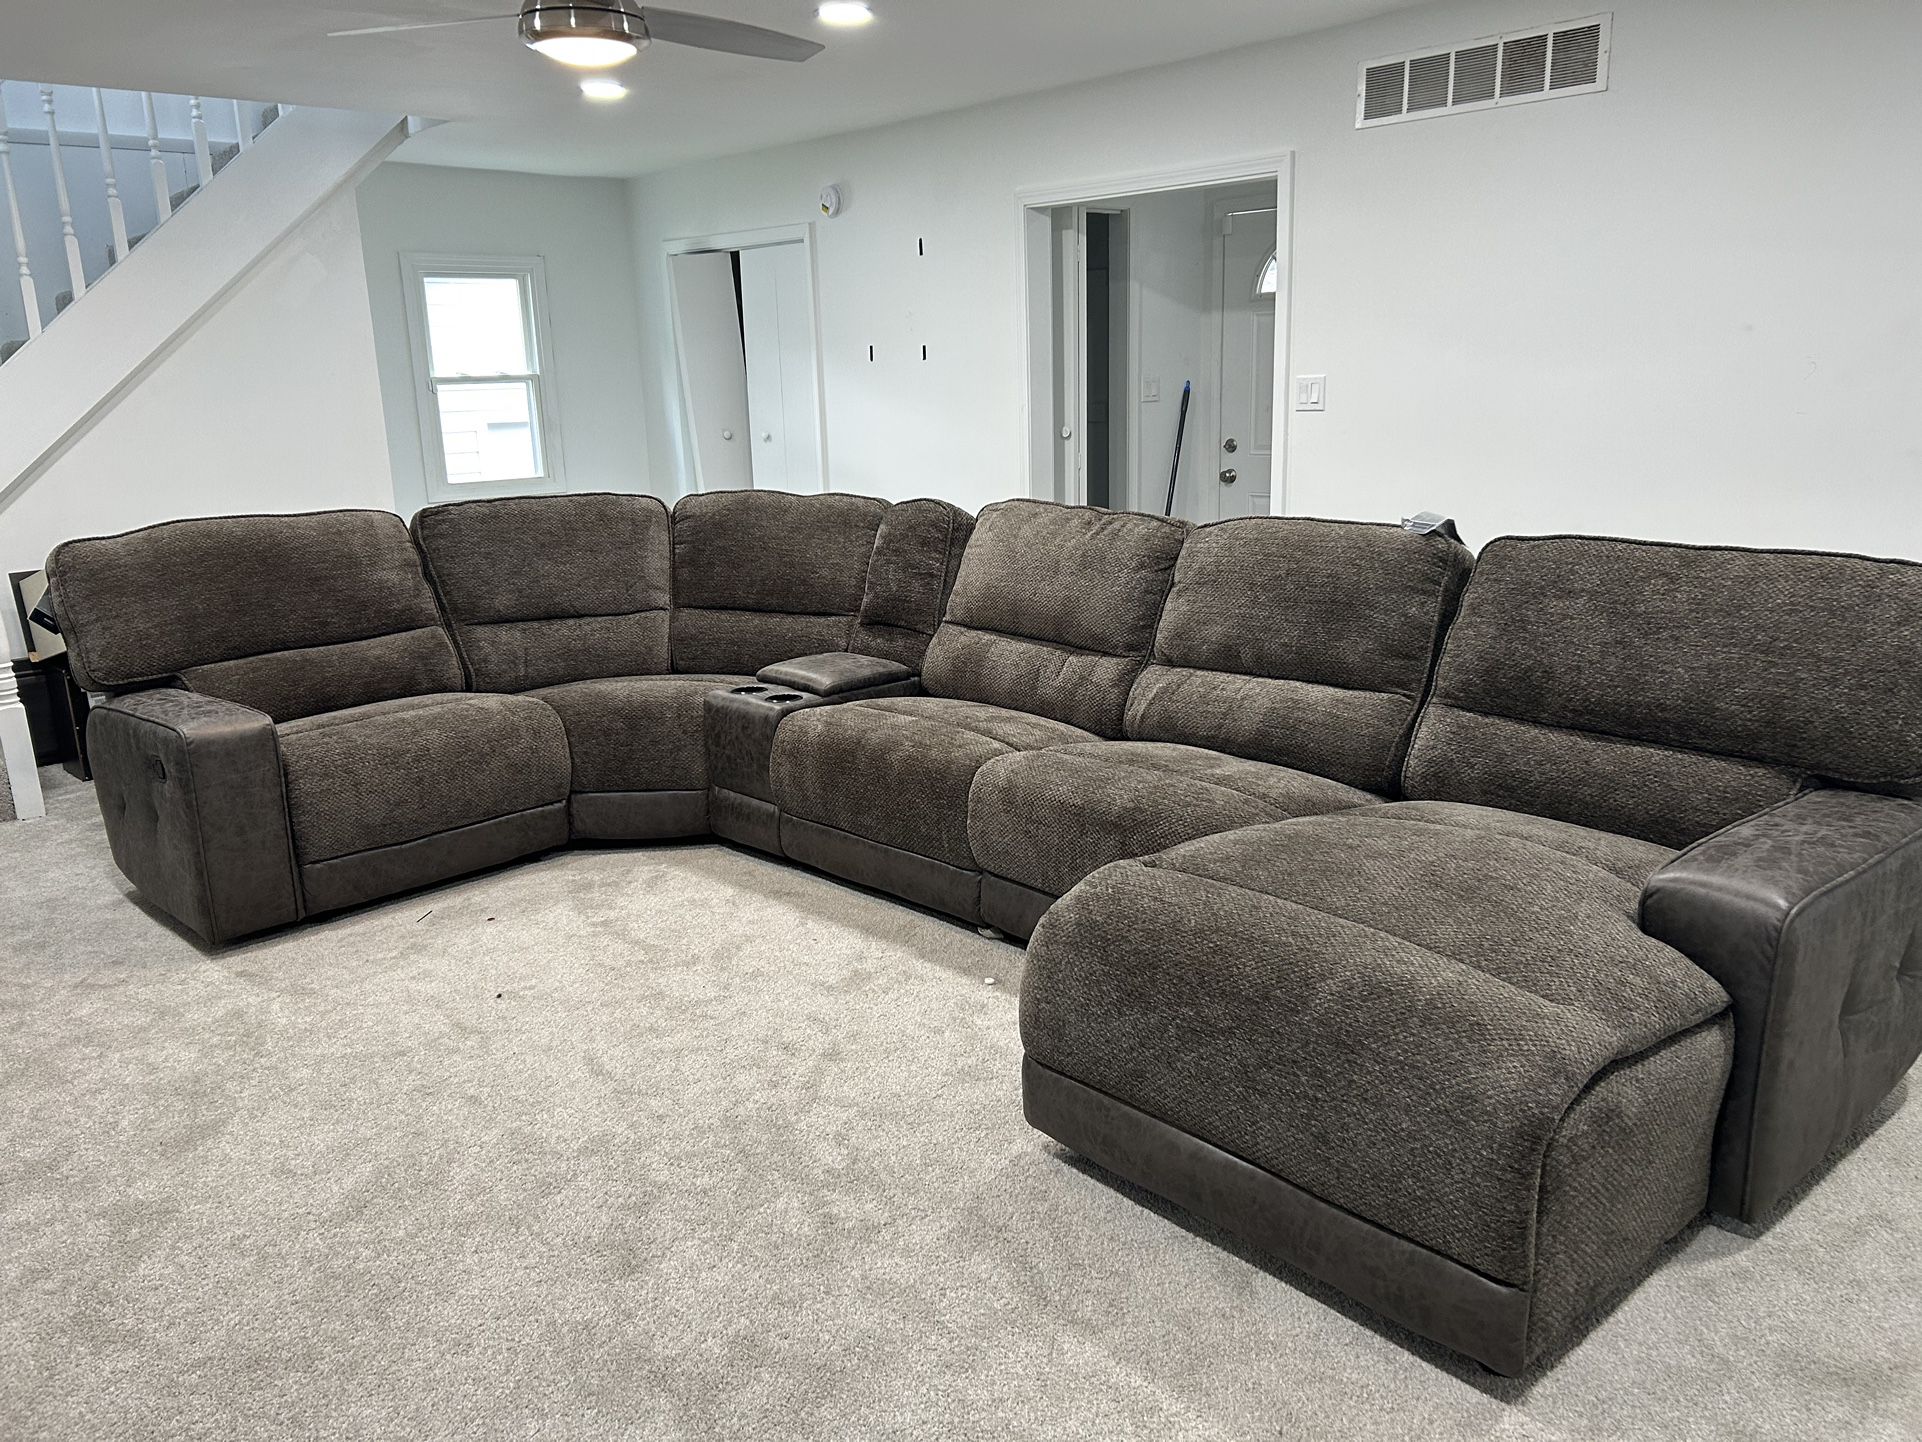 6 Sectional Couch